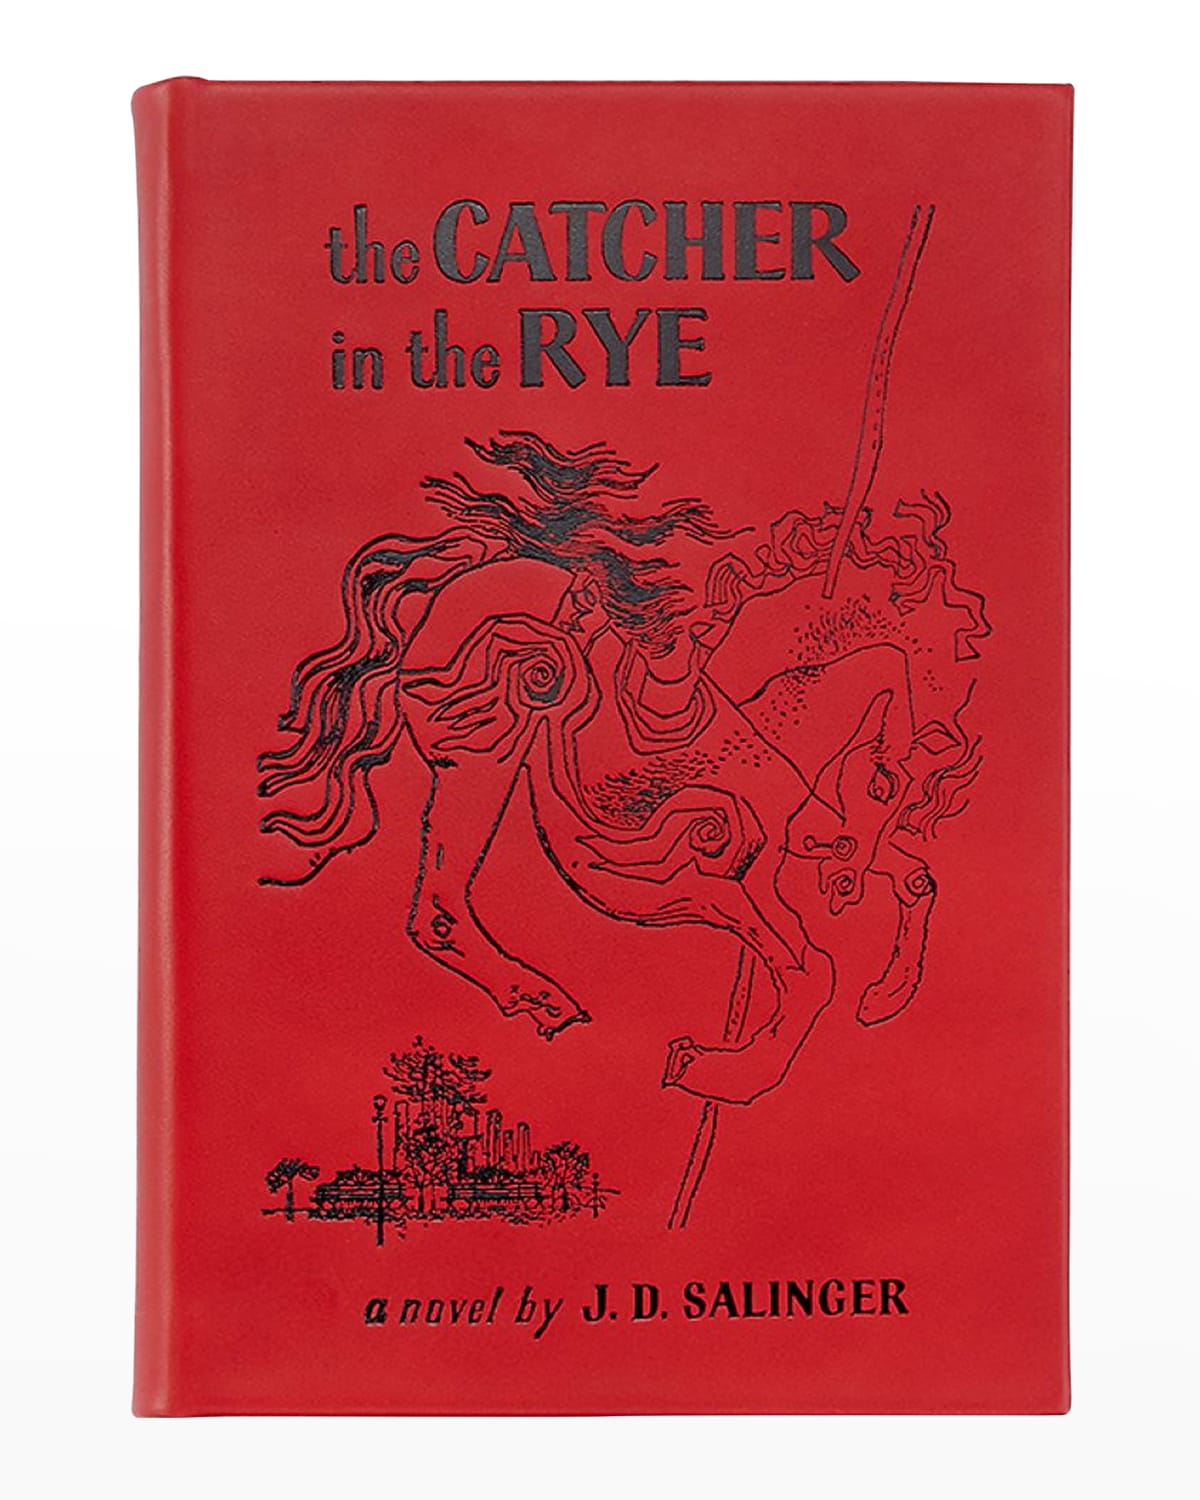 The Catcher in the Rye Book by J.D. Salinger